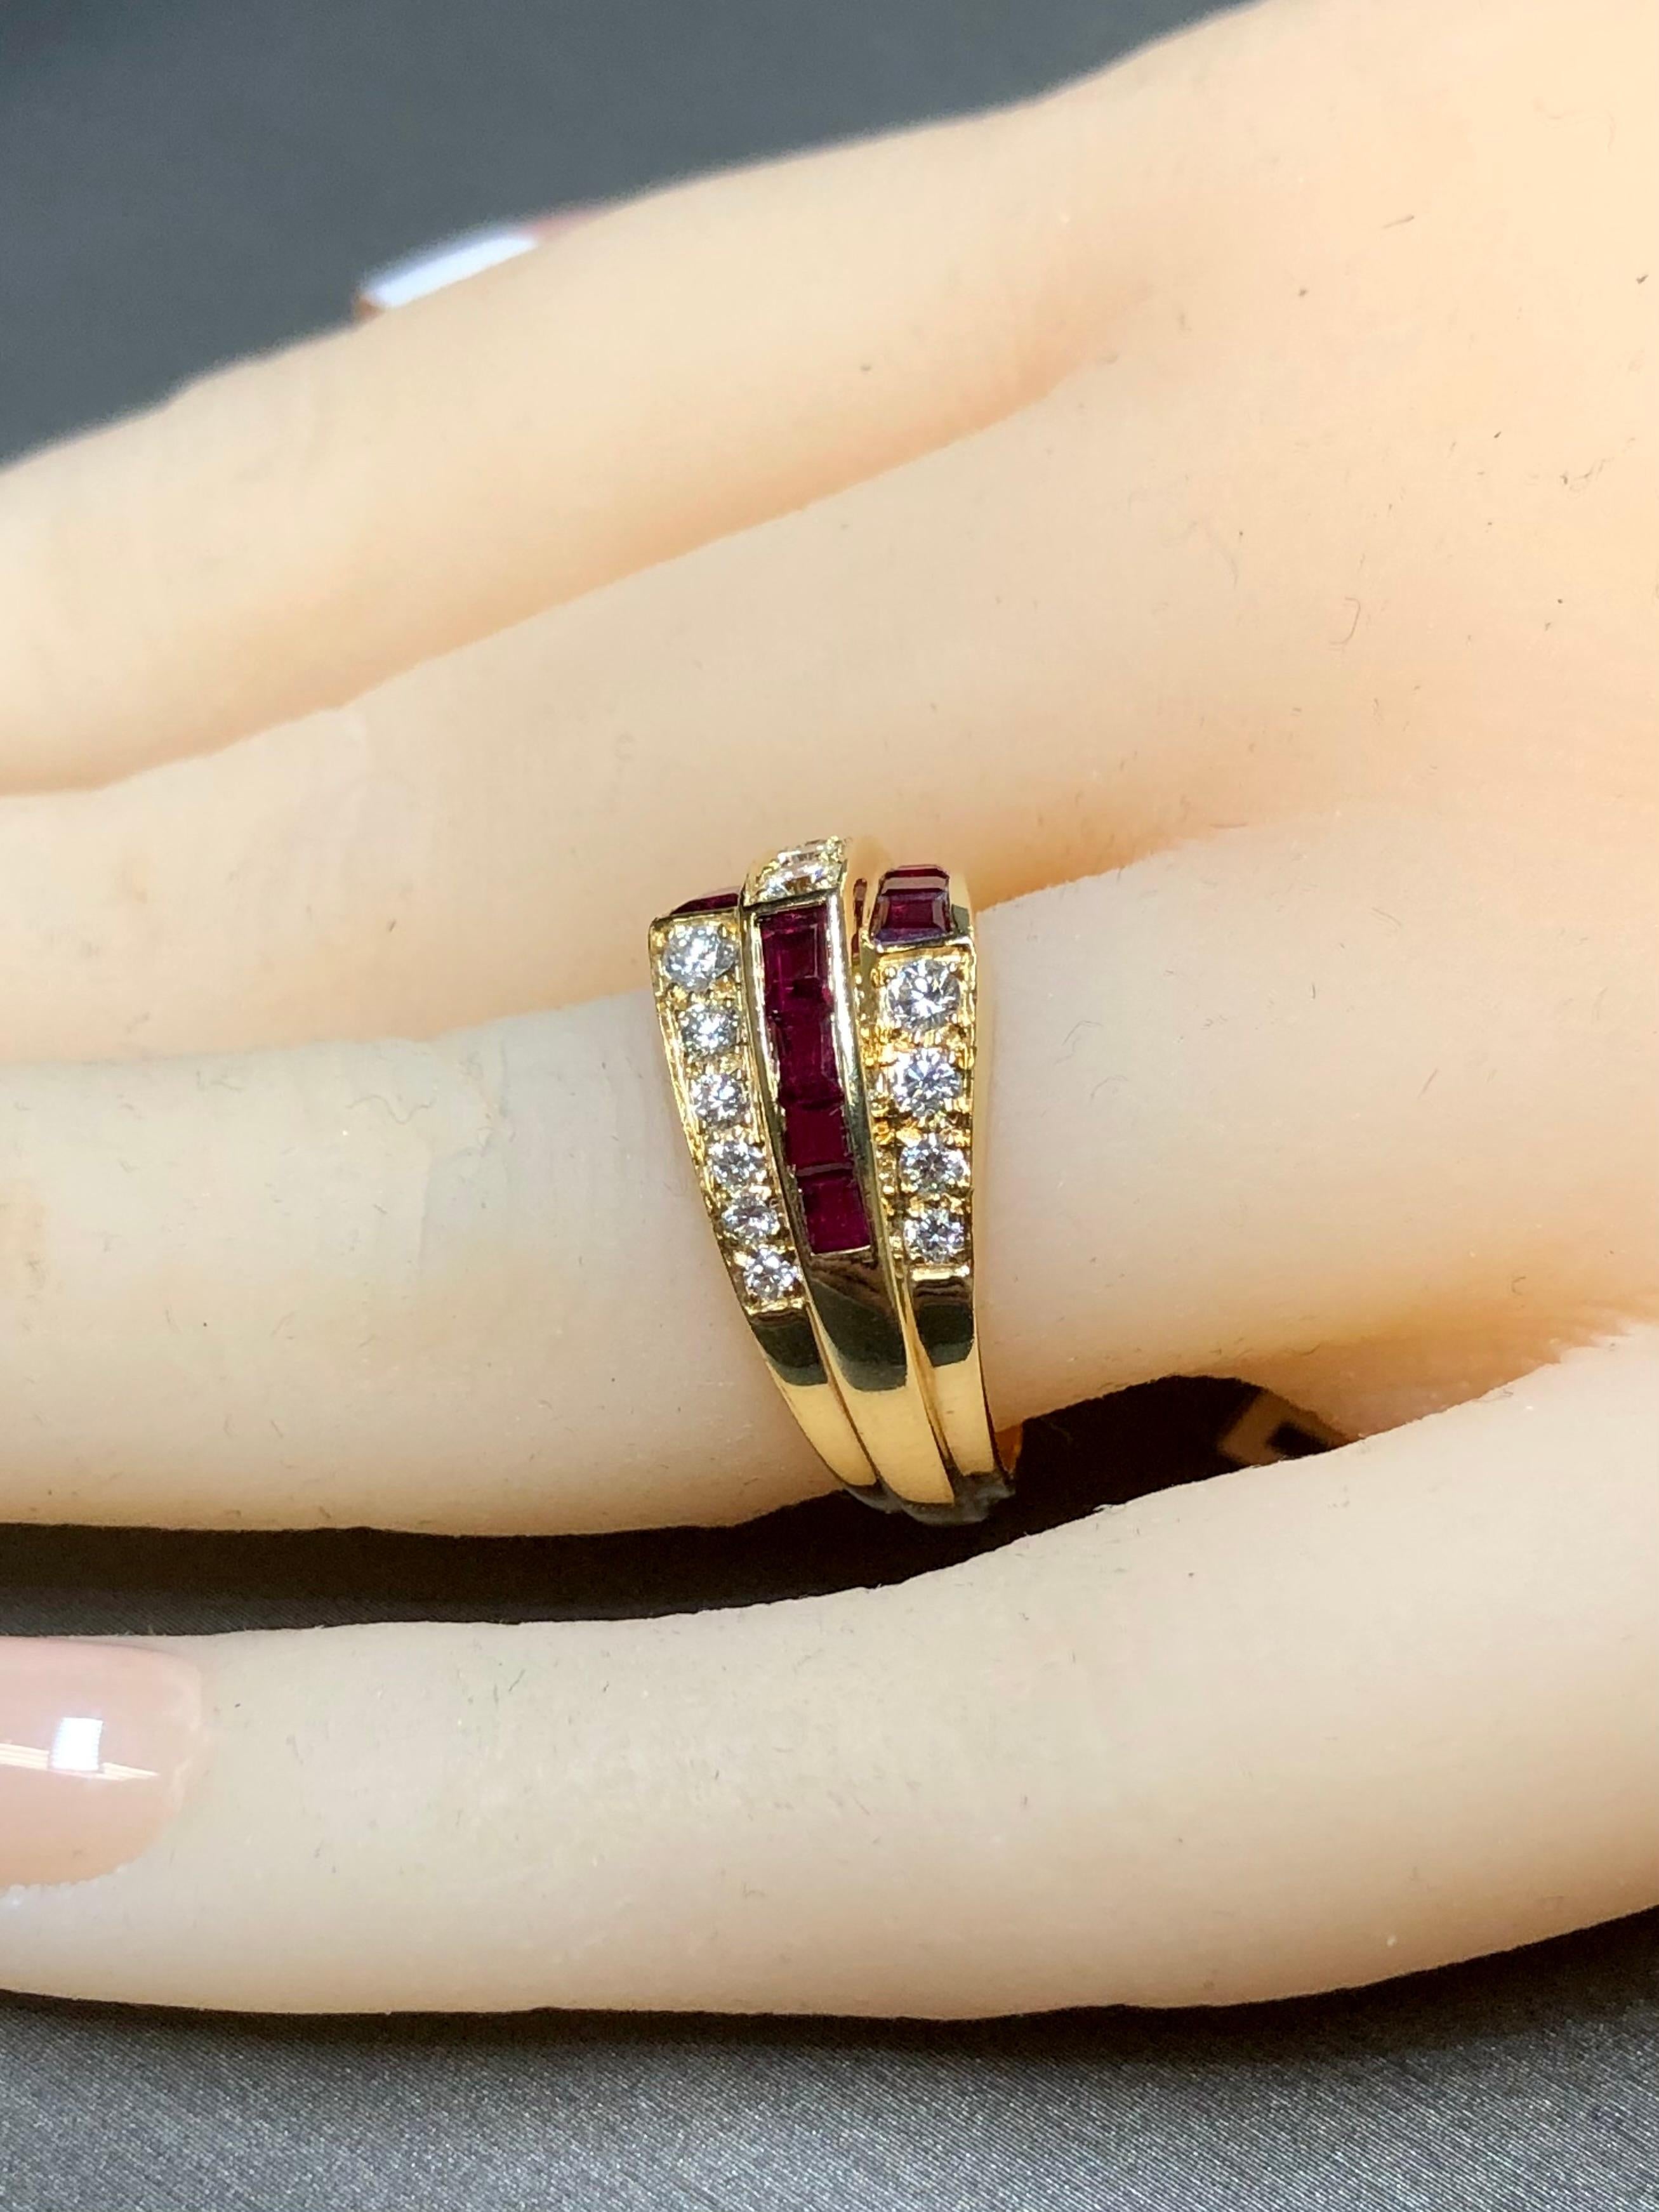 OSCAR HEYMAN 18K Ruby Diamond Cocktail Ring Sz 7.25 In Good Condition For Sale In Winter Springs, FL